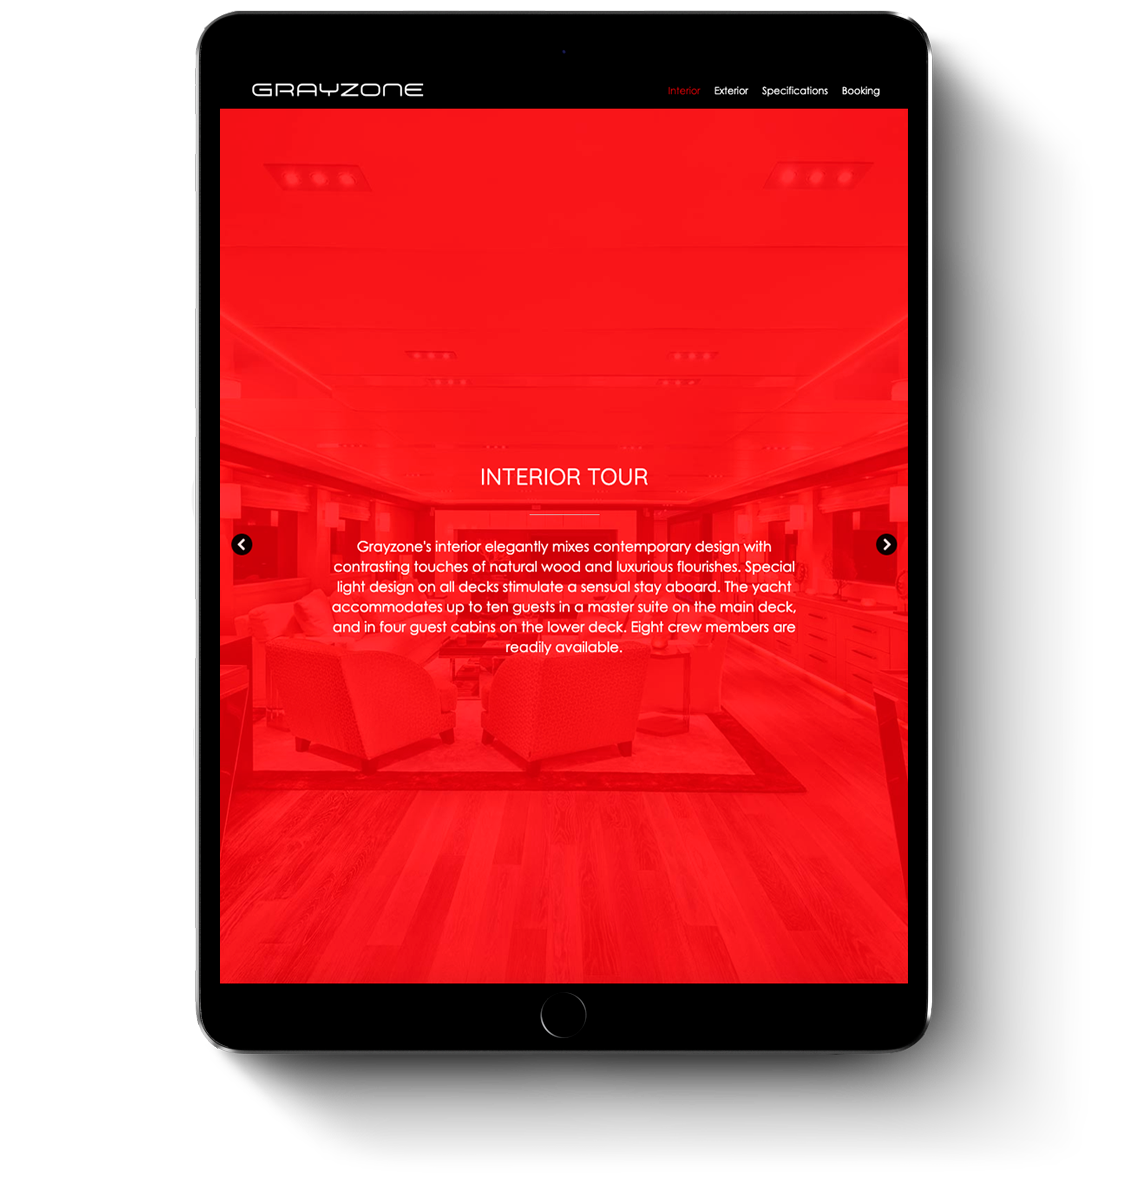 Grayzone super yacht web design for mobile devices and tablets